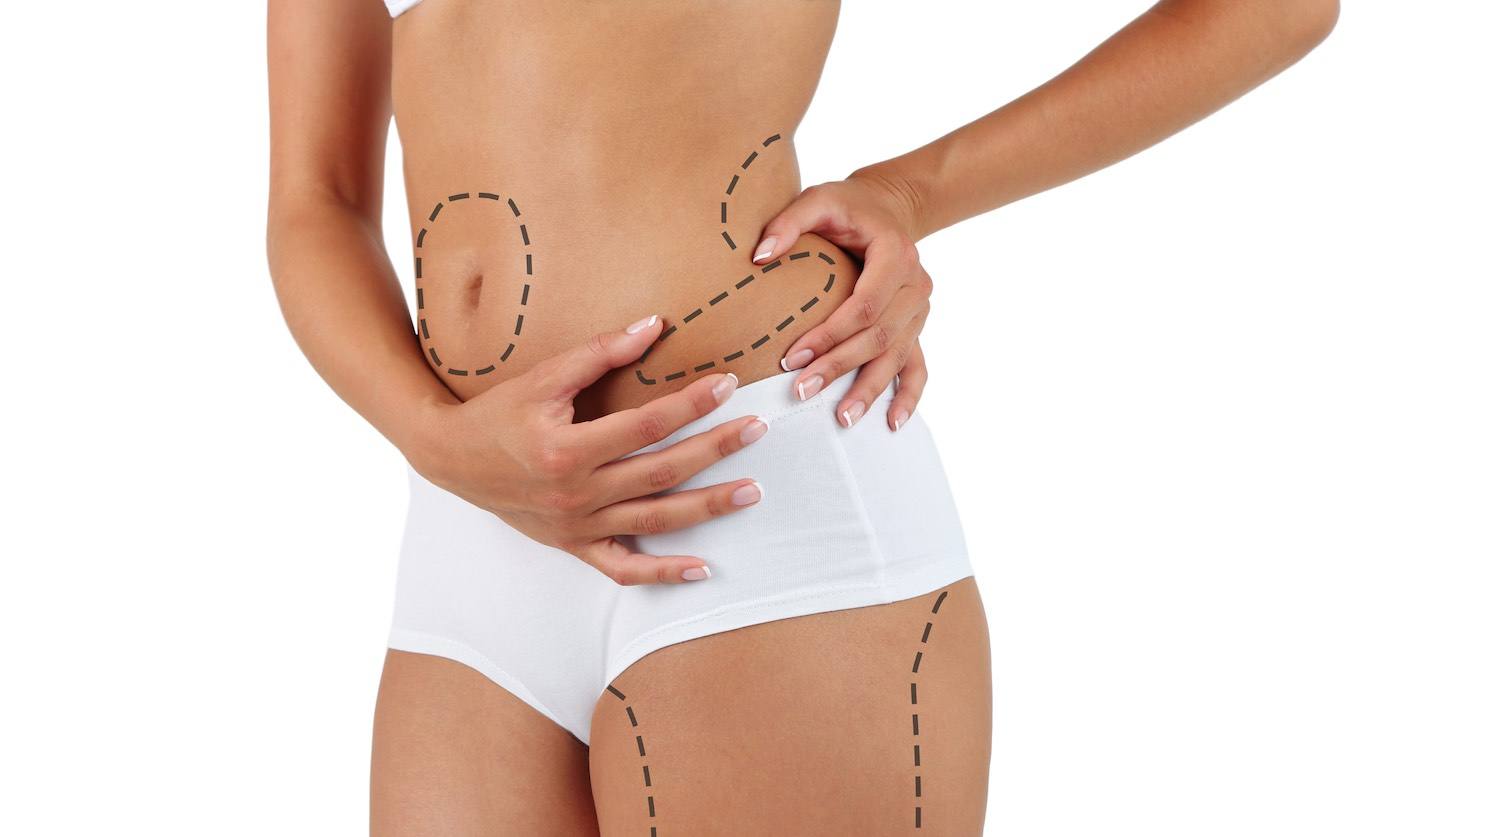 Liposuction | Liposuction Cost and Information